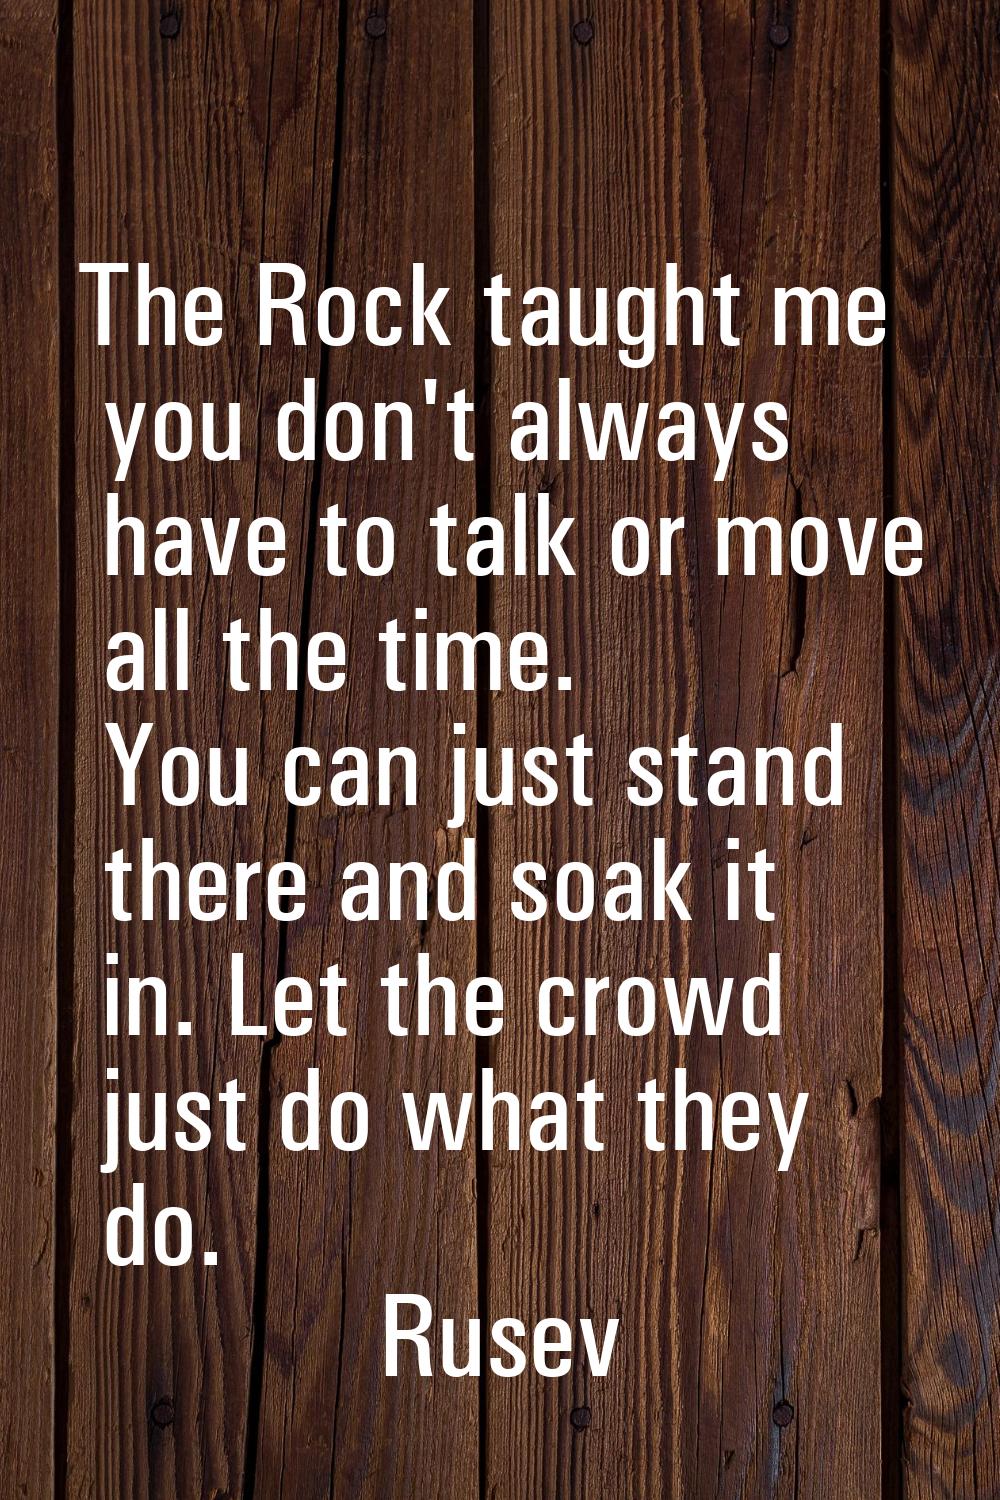 The Rock taught me you don't always have to talk or move all the time. You can just stand there and